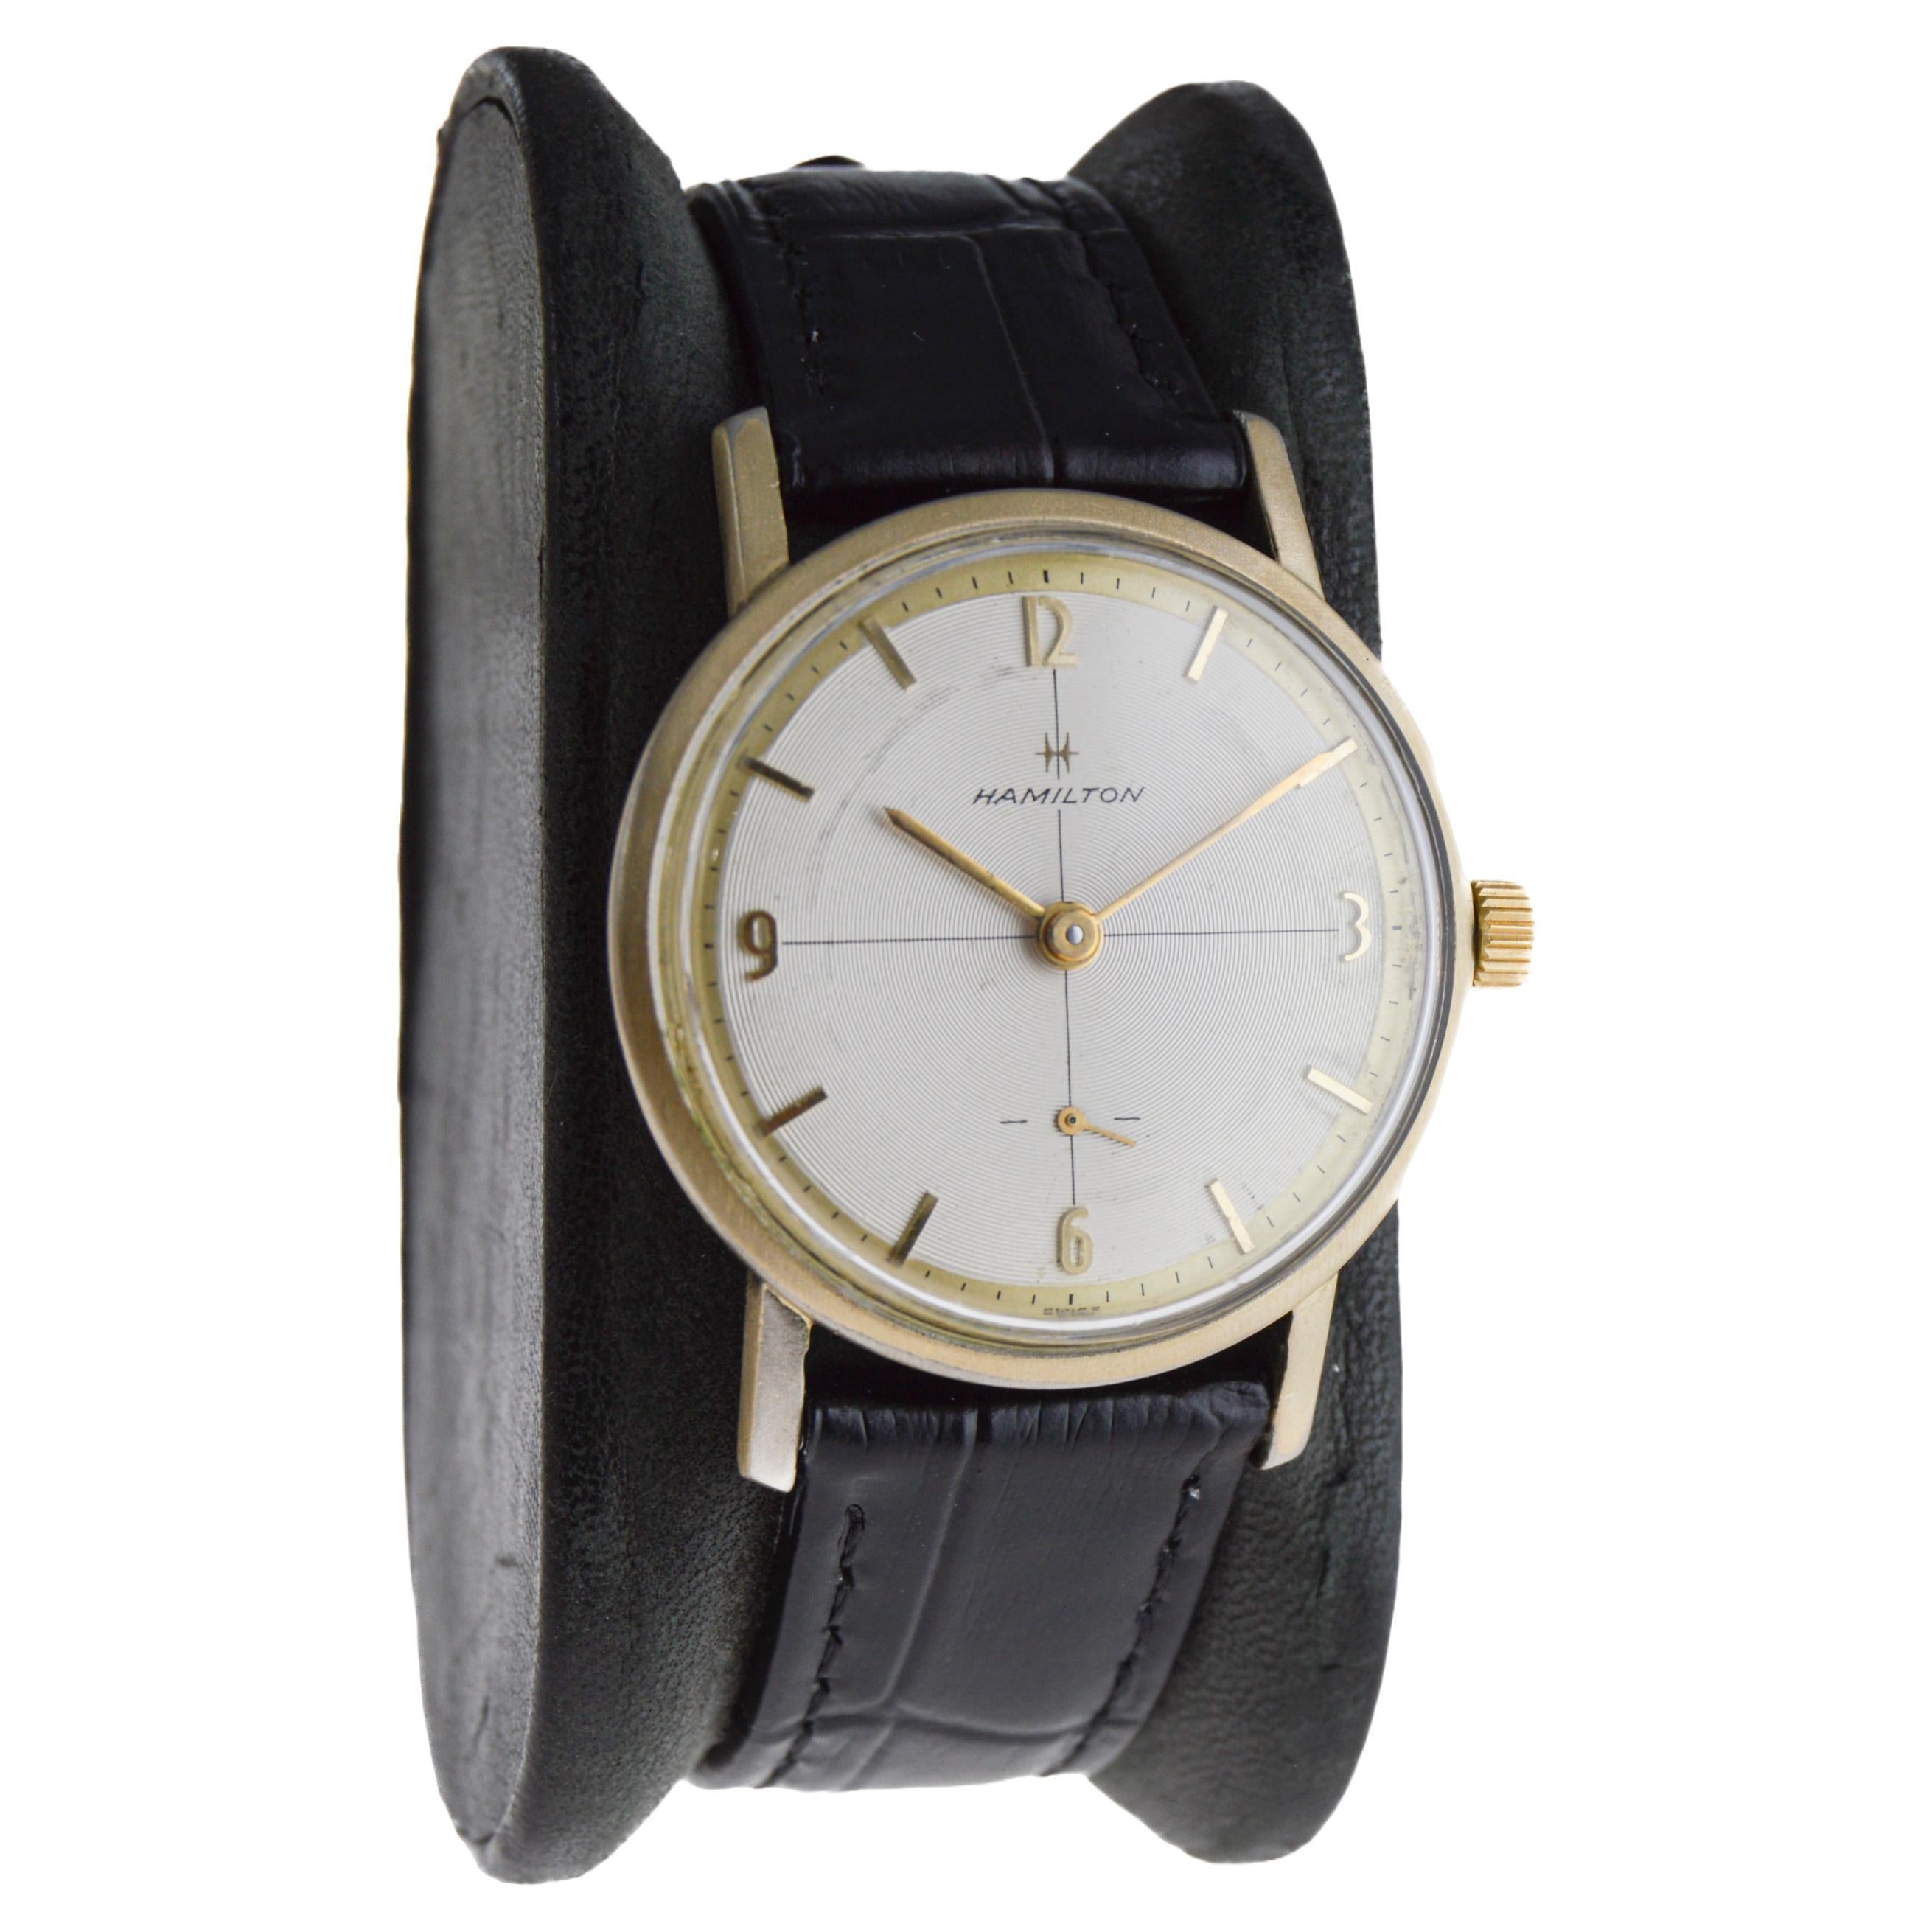 FACTORY / HOUSE: Hamilton Watch Company
STYLE / REFERENCE: Modern / Dress Style 
METAL / MATERIAL: Yellow Gold-Filled
CIRCA / YEAR: 1950's
DIMENSIONS / SIZE: Length 33mm X Diameter 22mm
MOVEMENT / CALIBER: Manual Winding / 17 Jewels / Caliber